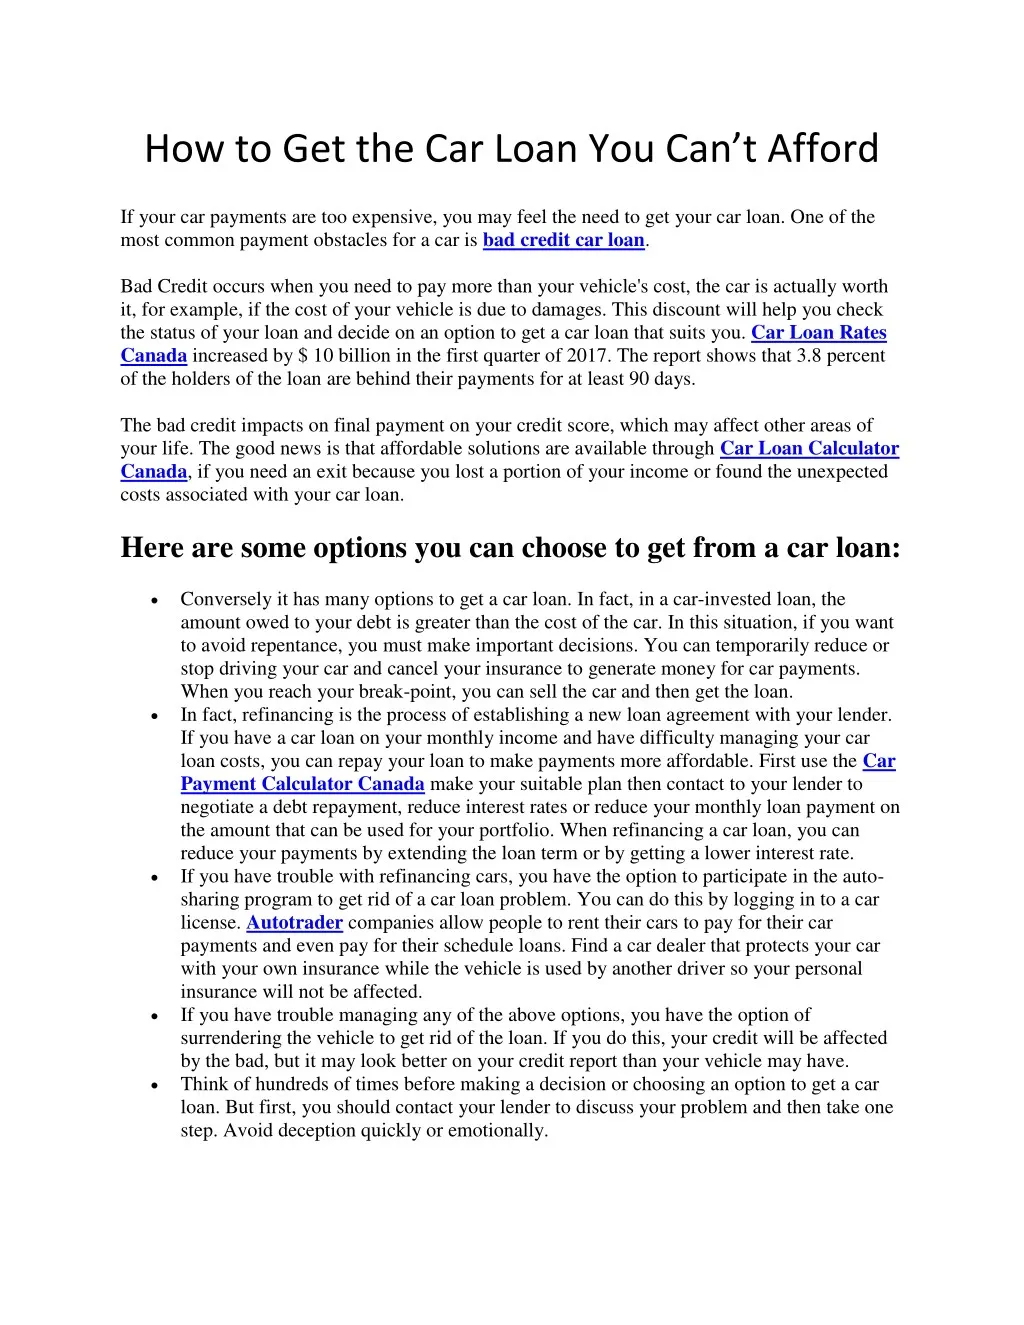 how to get the car loan you can t afford